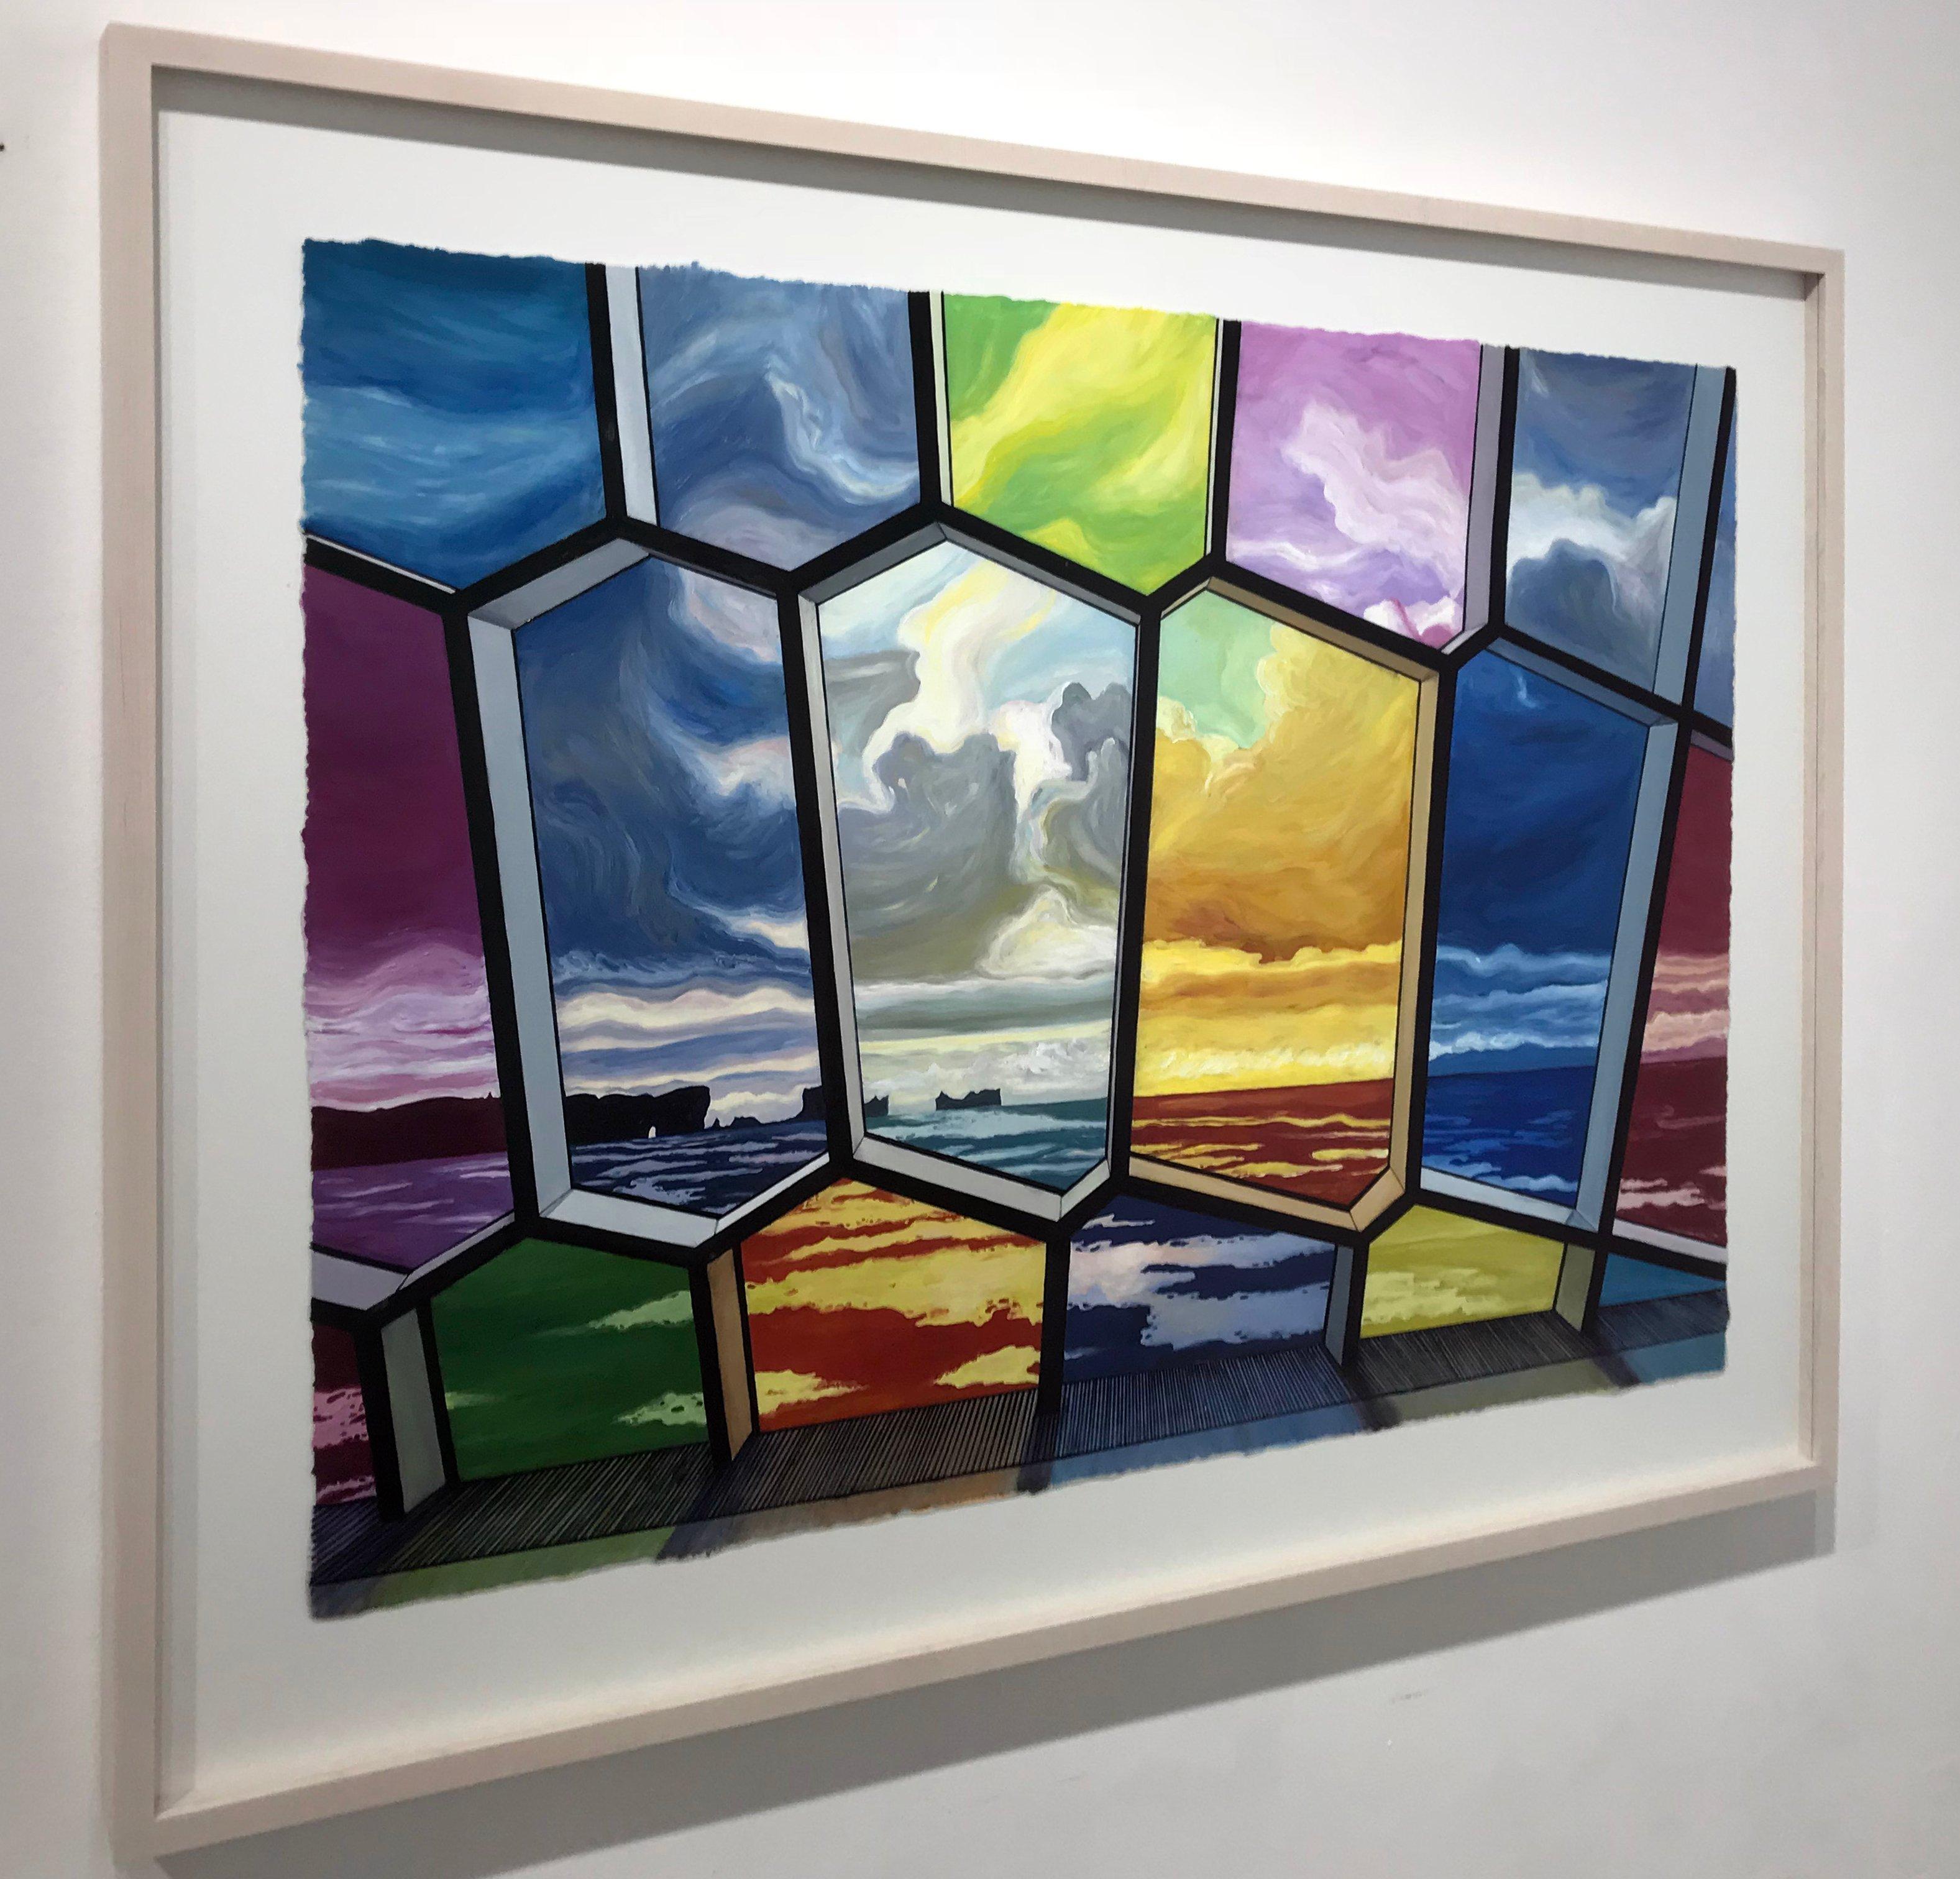 ink and oil on mounted Mylar, signed on reverse (framed in hardwood, pickled maple frame with museum glass)

“Bricks and Stones May Break (Iceland/Rainbow Windows)” is based on the windows Olafur Eliasson designed for the Harpa Opera House in